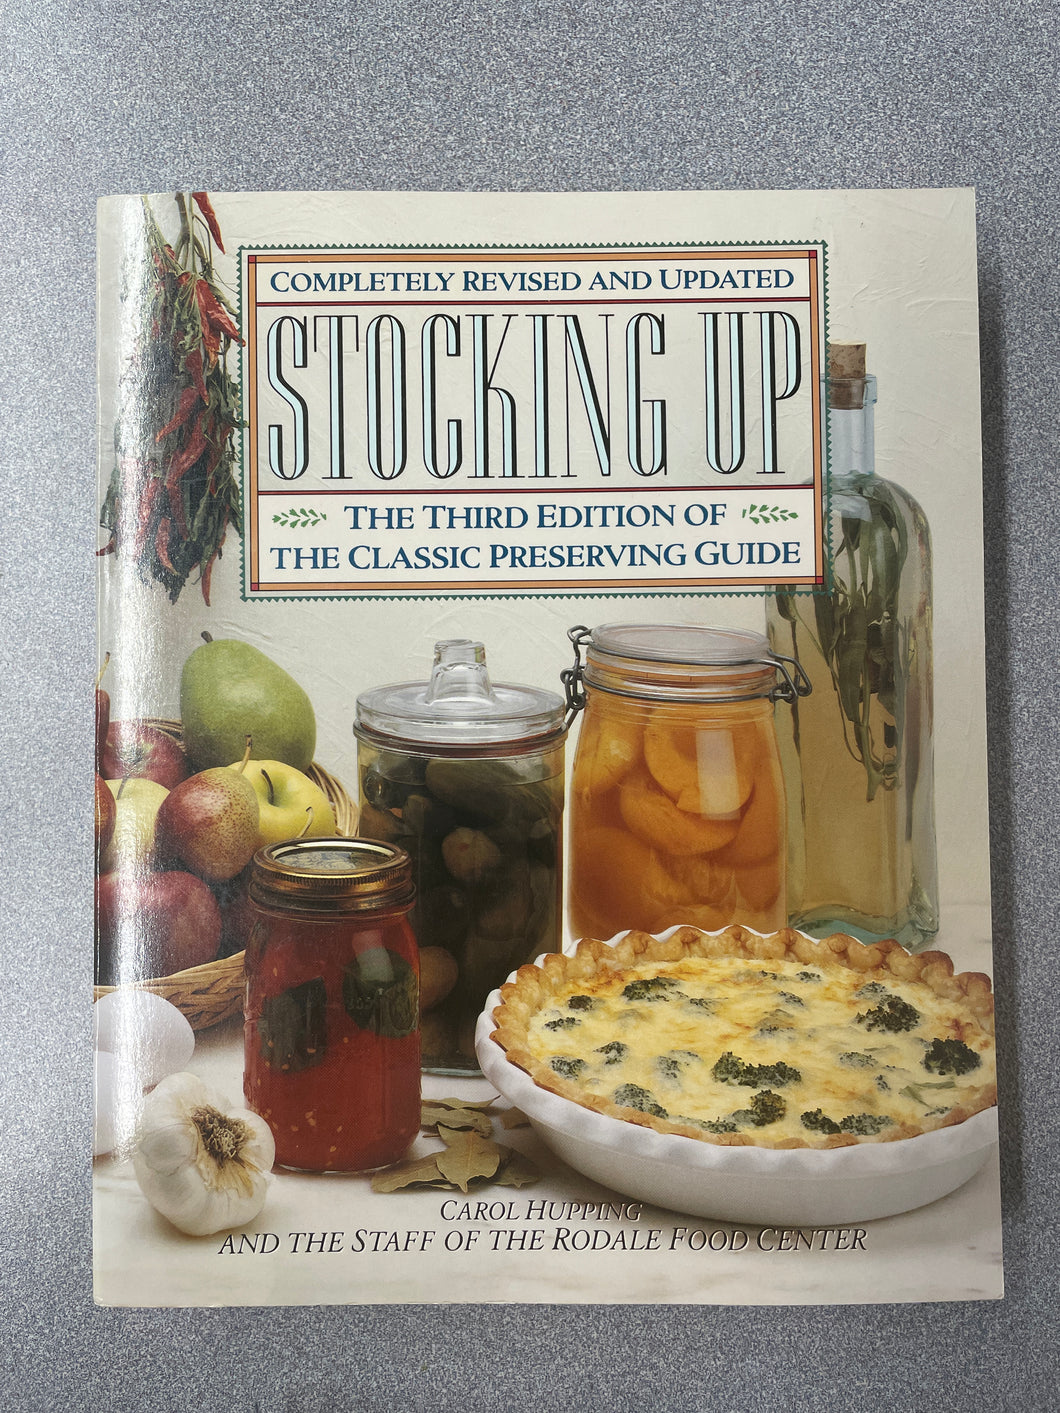 Stocking Up: The Third Edition of the Classic Preserving Guide, Completely Revised and Updated, Hupping, Carol [1990] CO 4/24